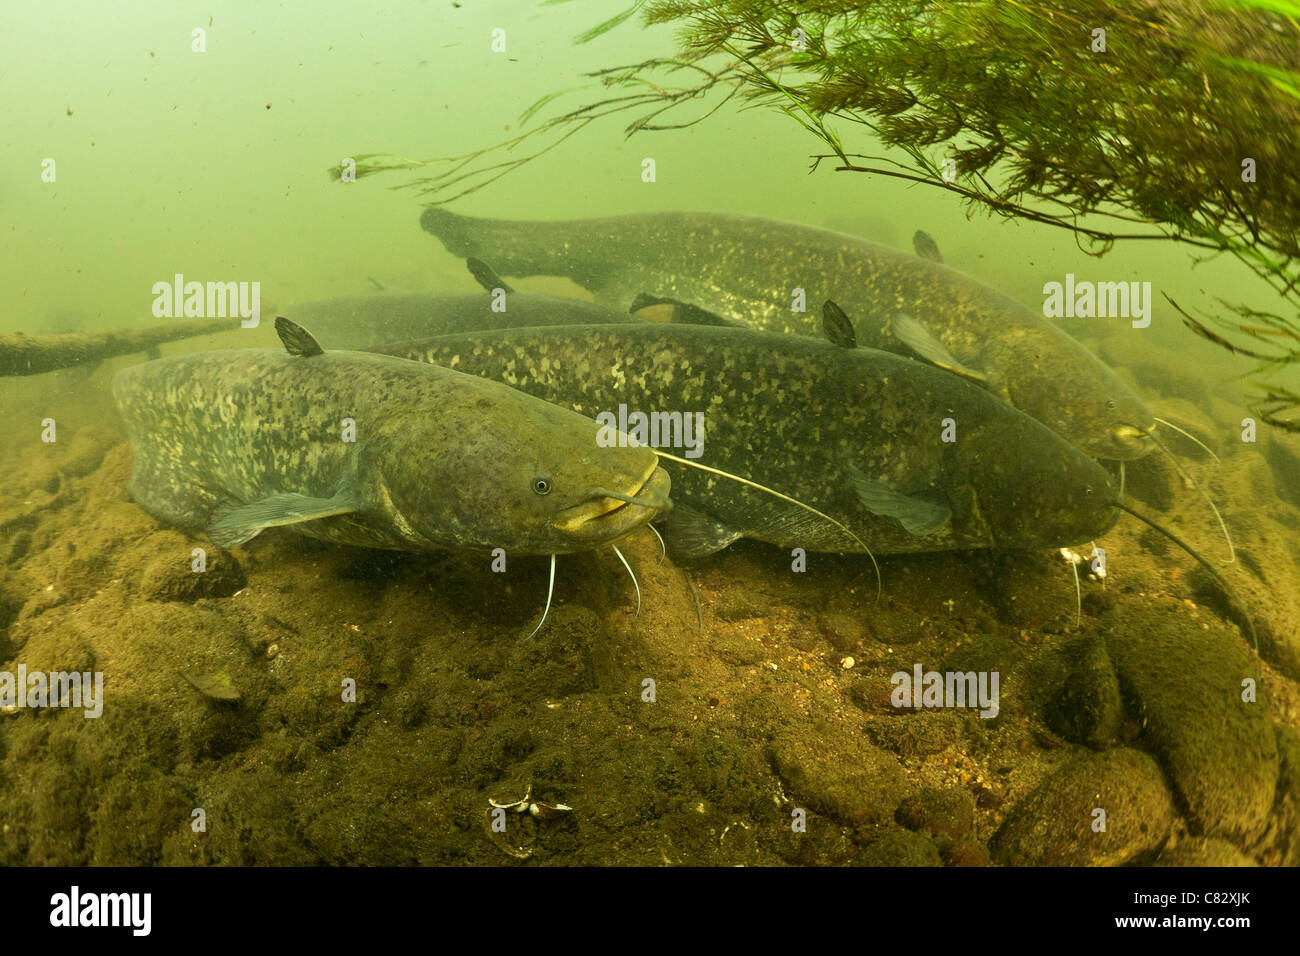 Wels catfish (Silurus glanis) in their natural surroundings (France). Also called Sheatfish, they get whisker-like barbels. Stock Photo